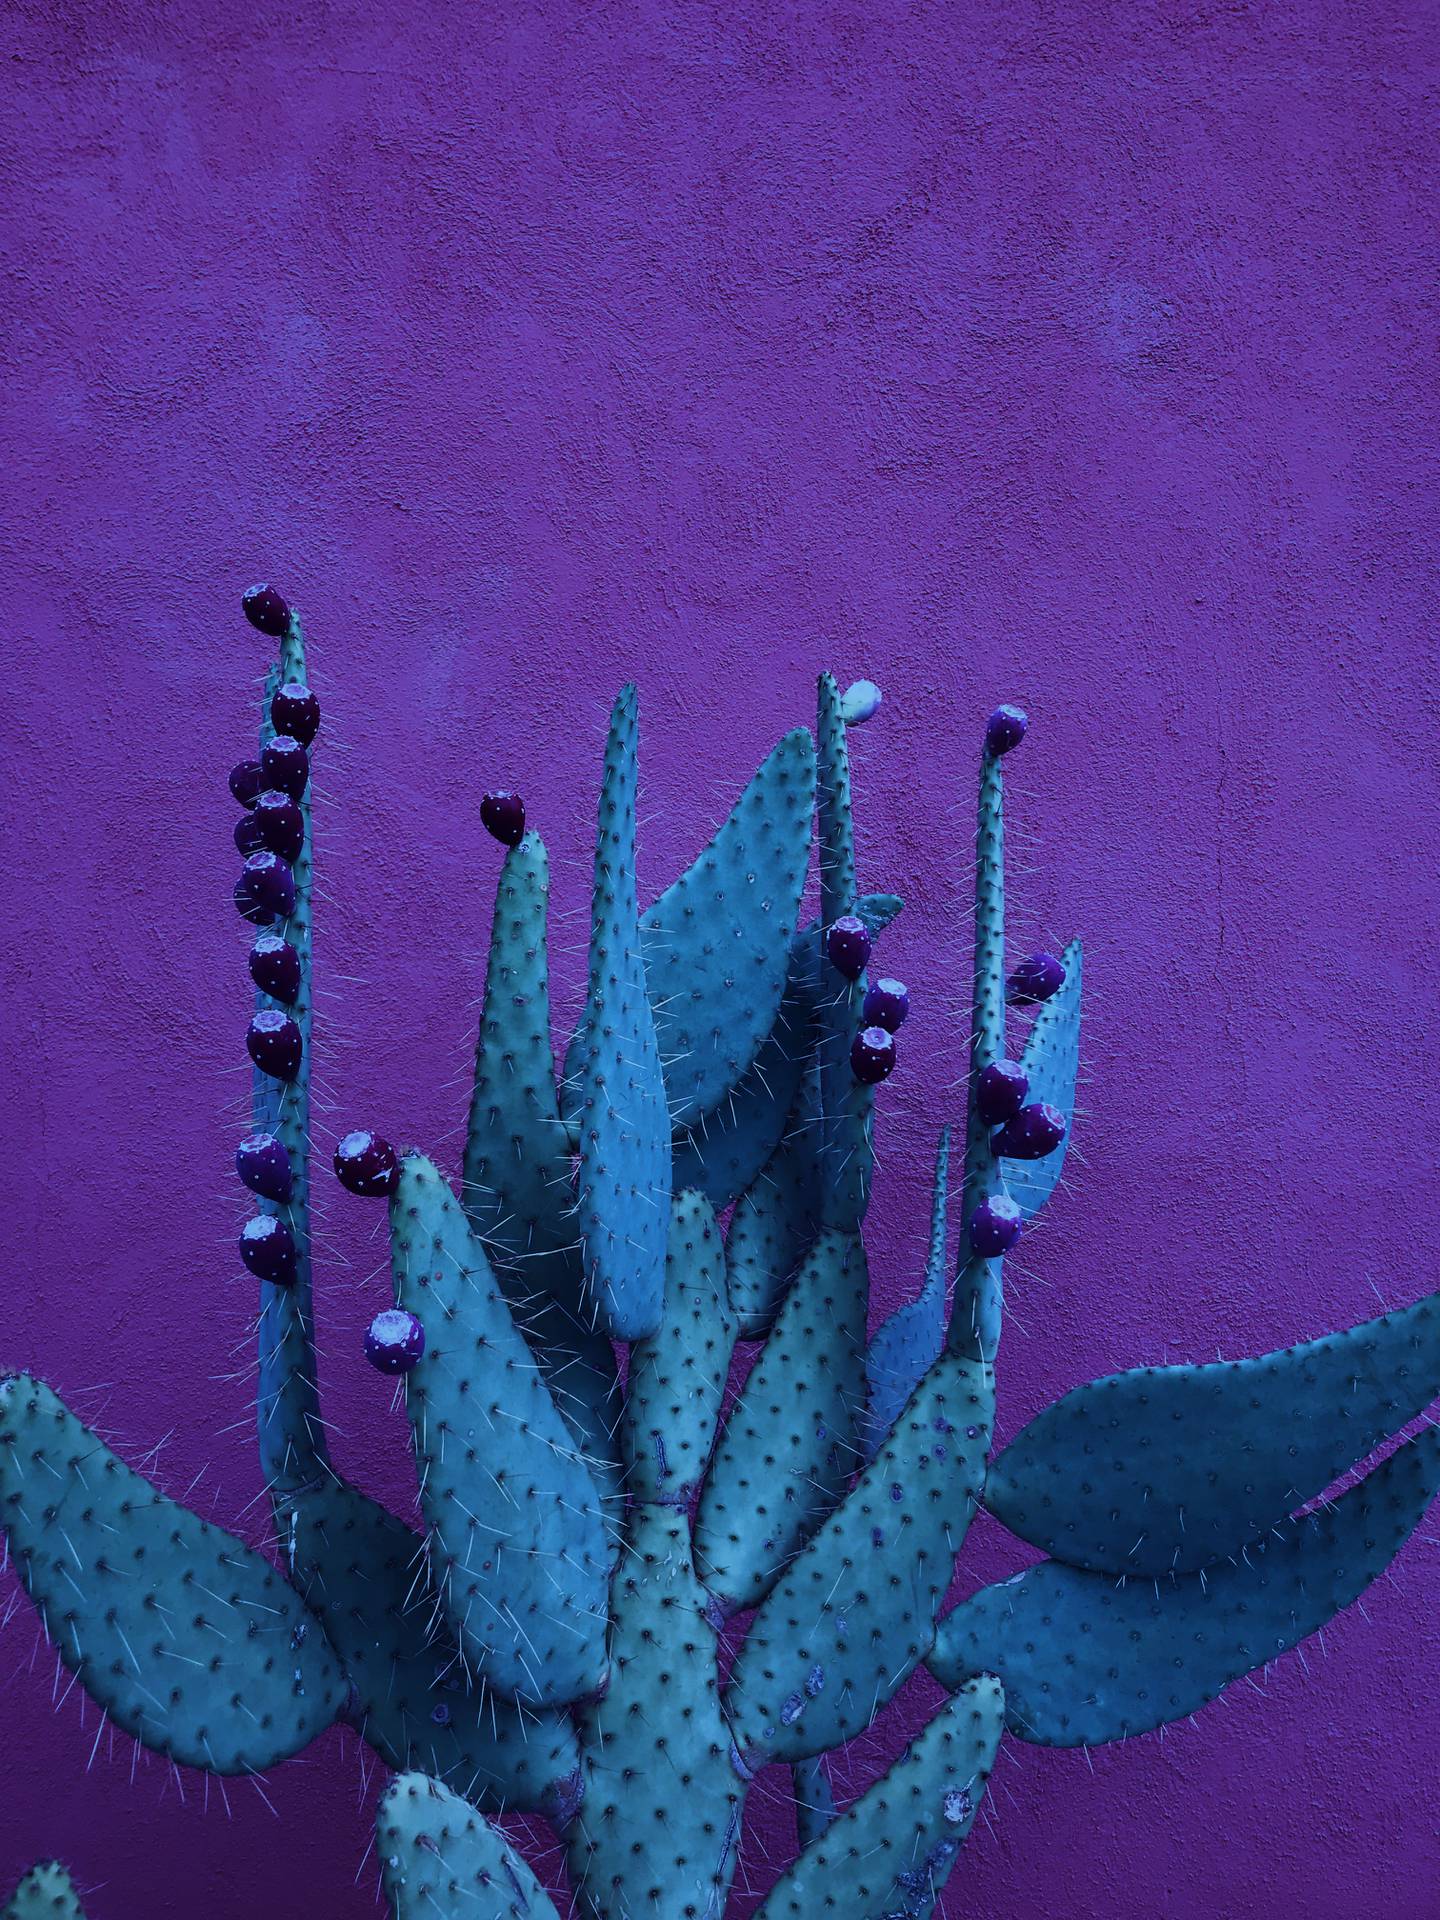 'Midnight Succulent', shot in Arizona by Charlotte Mason Mottram from the UK. The picture was taken on an iPhone 7 Plus. Photo: Charlotte Mason Mottram / IPPAWARDS